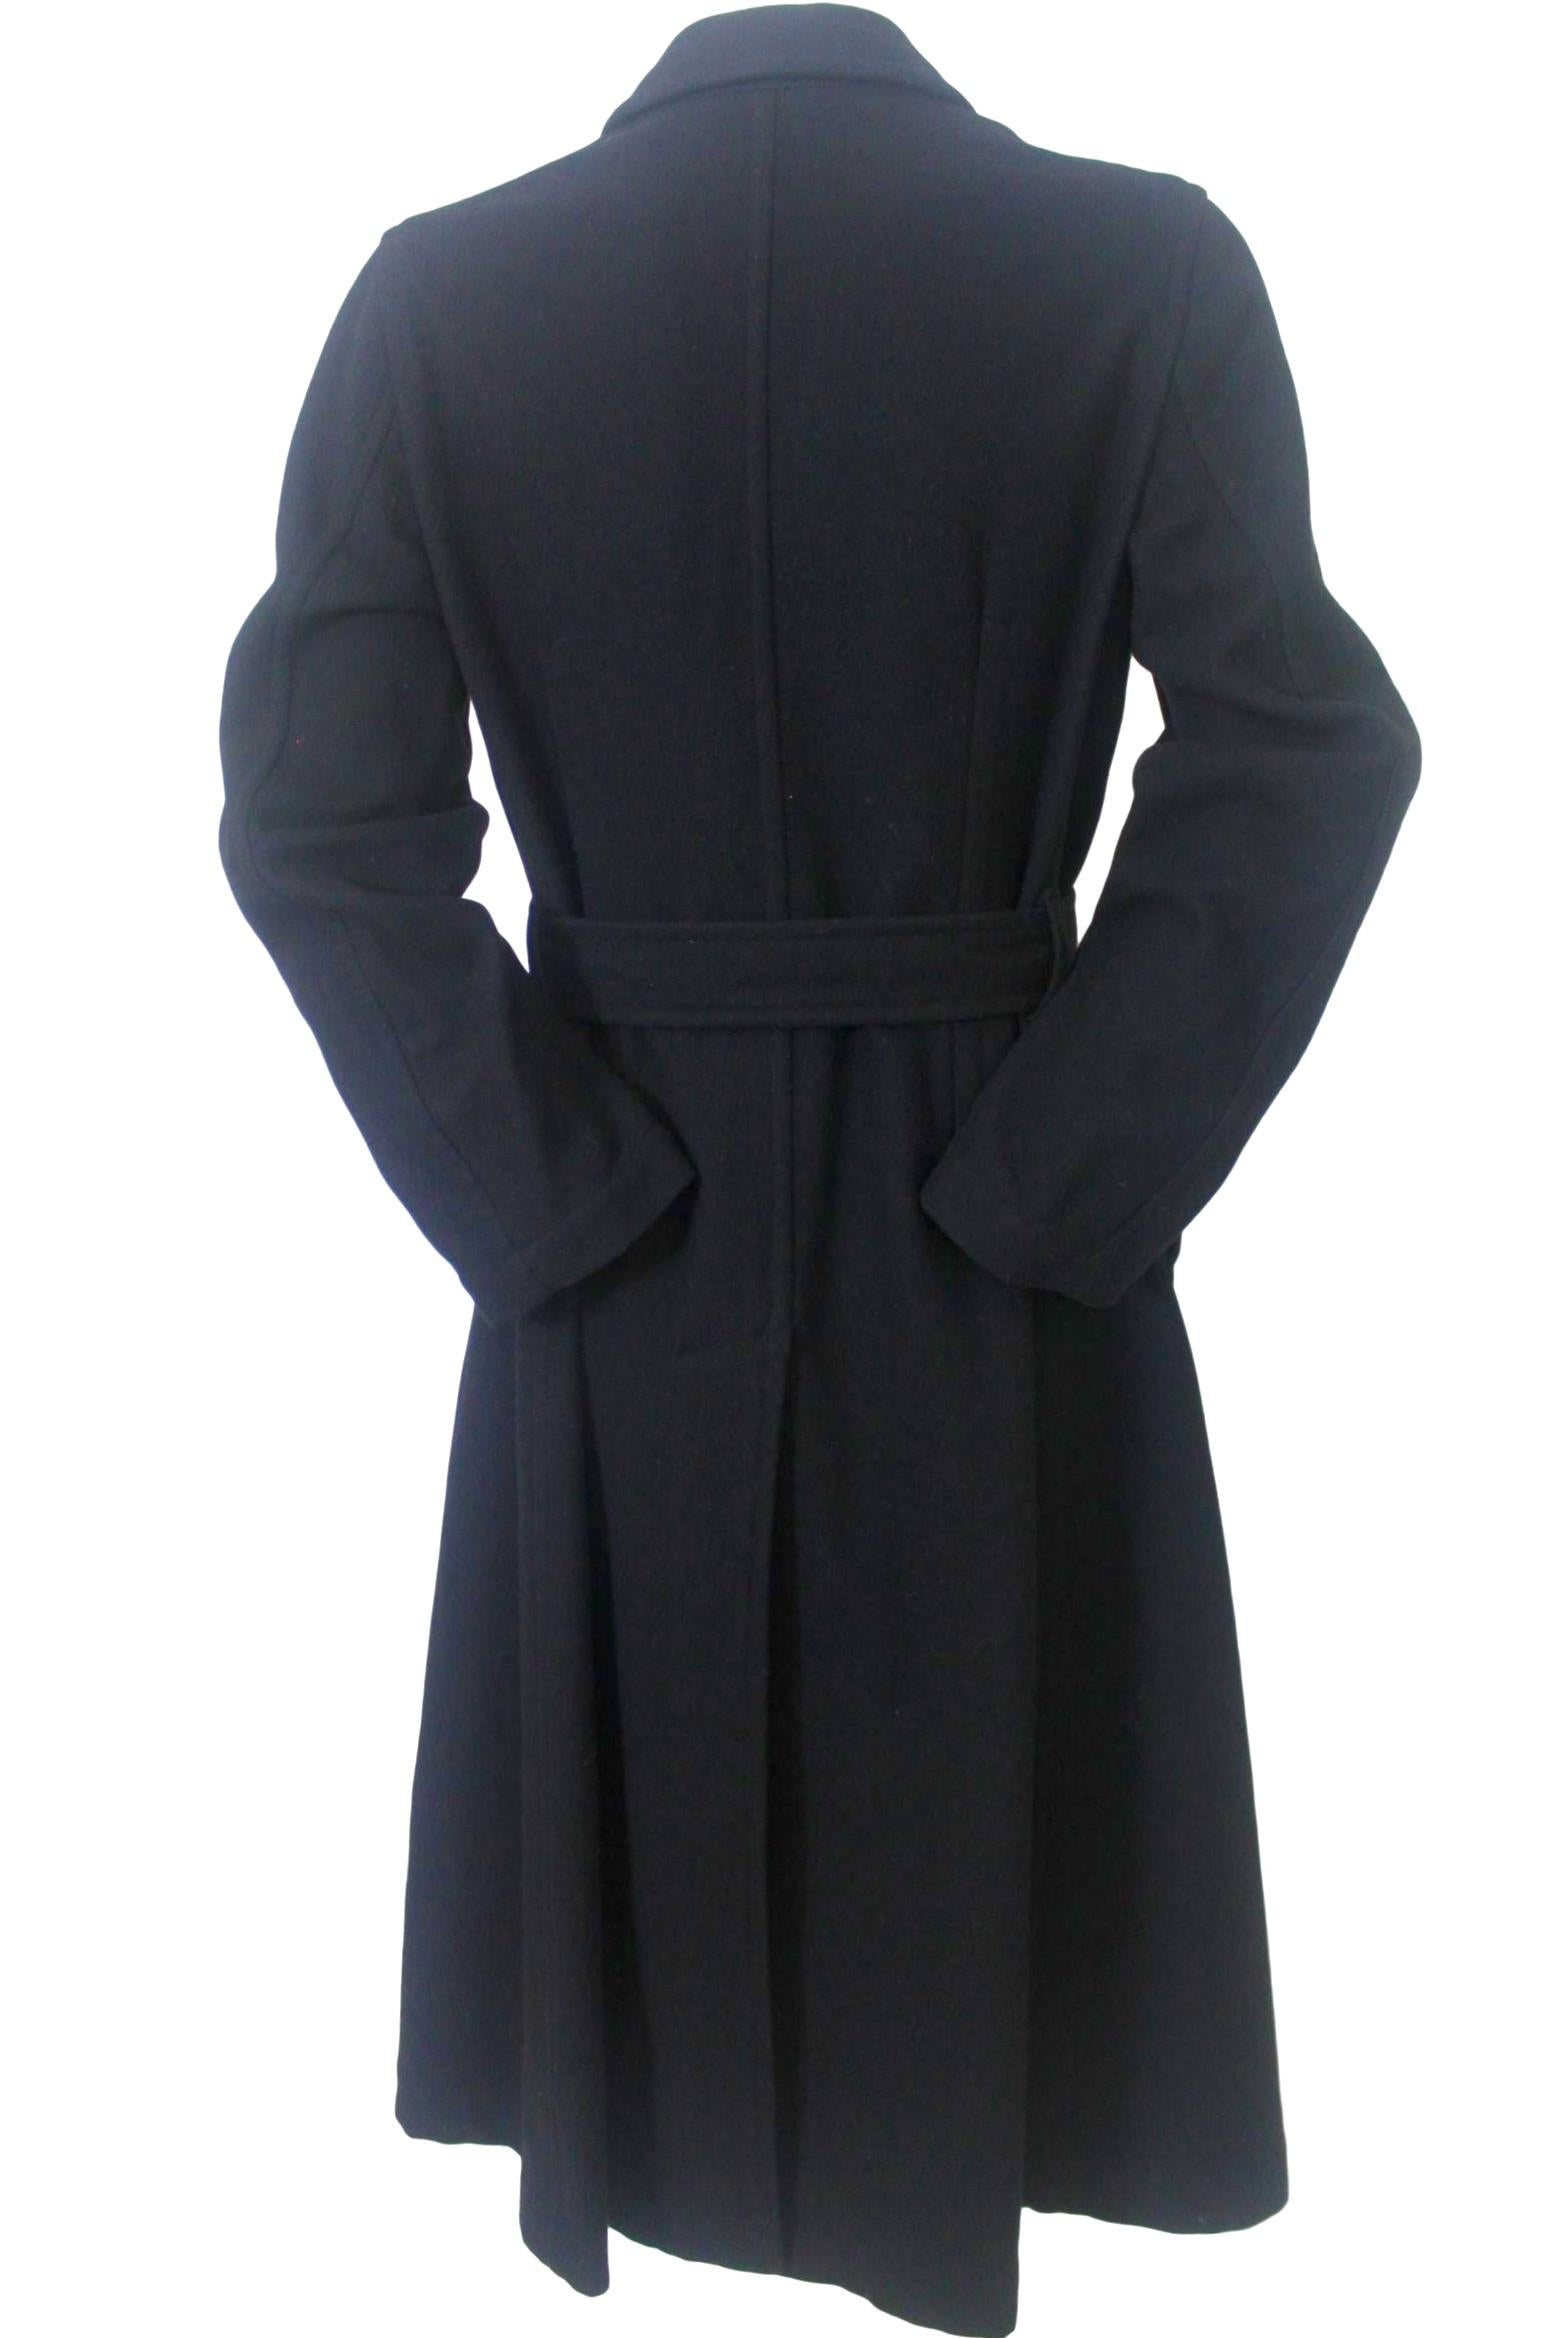 Comme des Garcons 2006 Collection Wool Coat with Bow Decoration For Sale 5